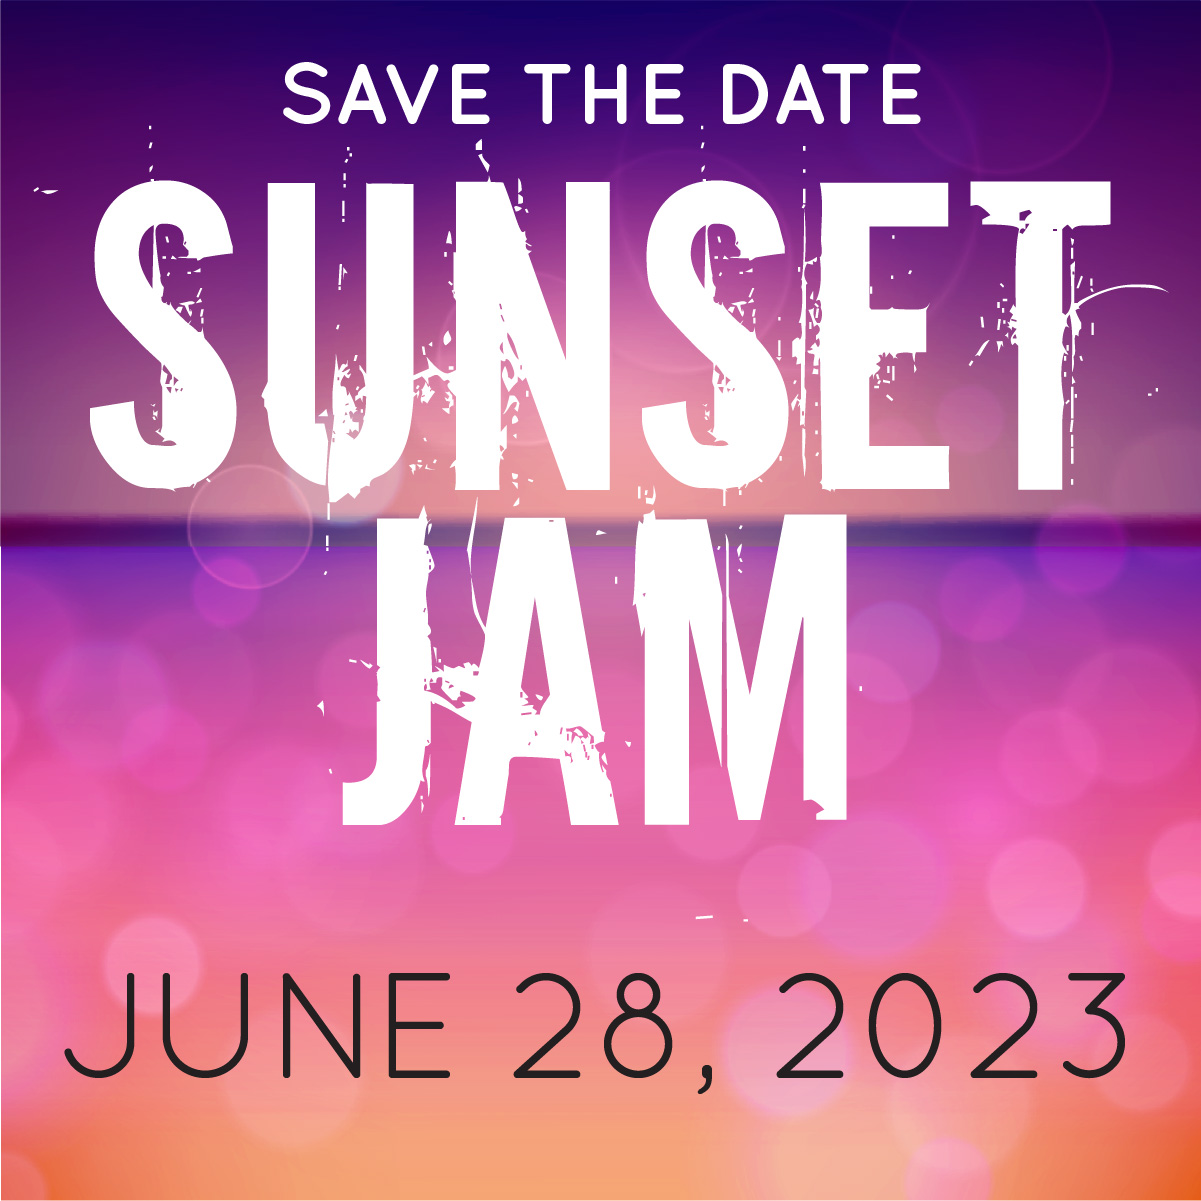 Save the Date June 28 for Sunset Jam 2023